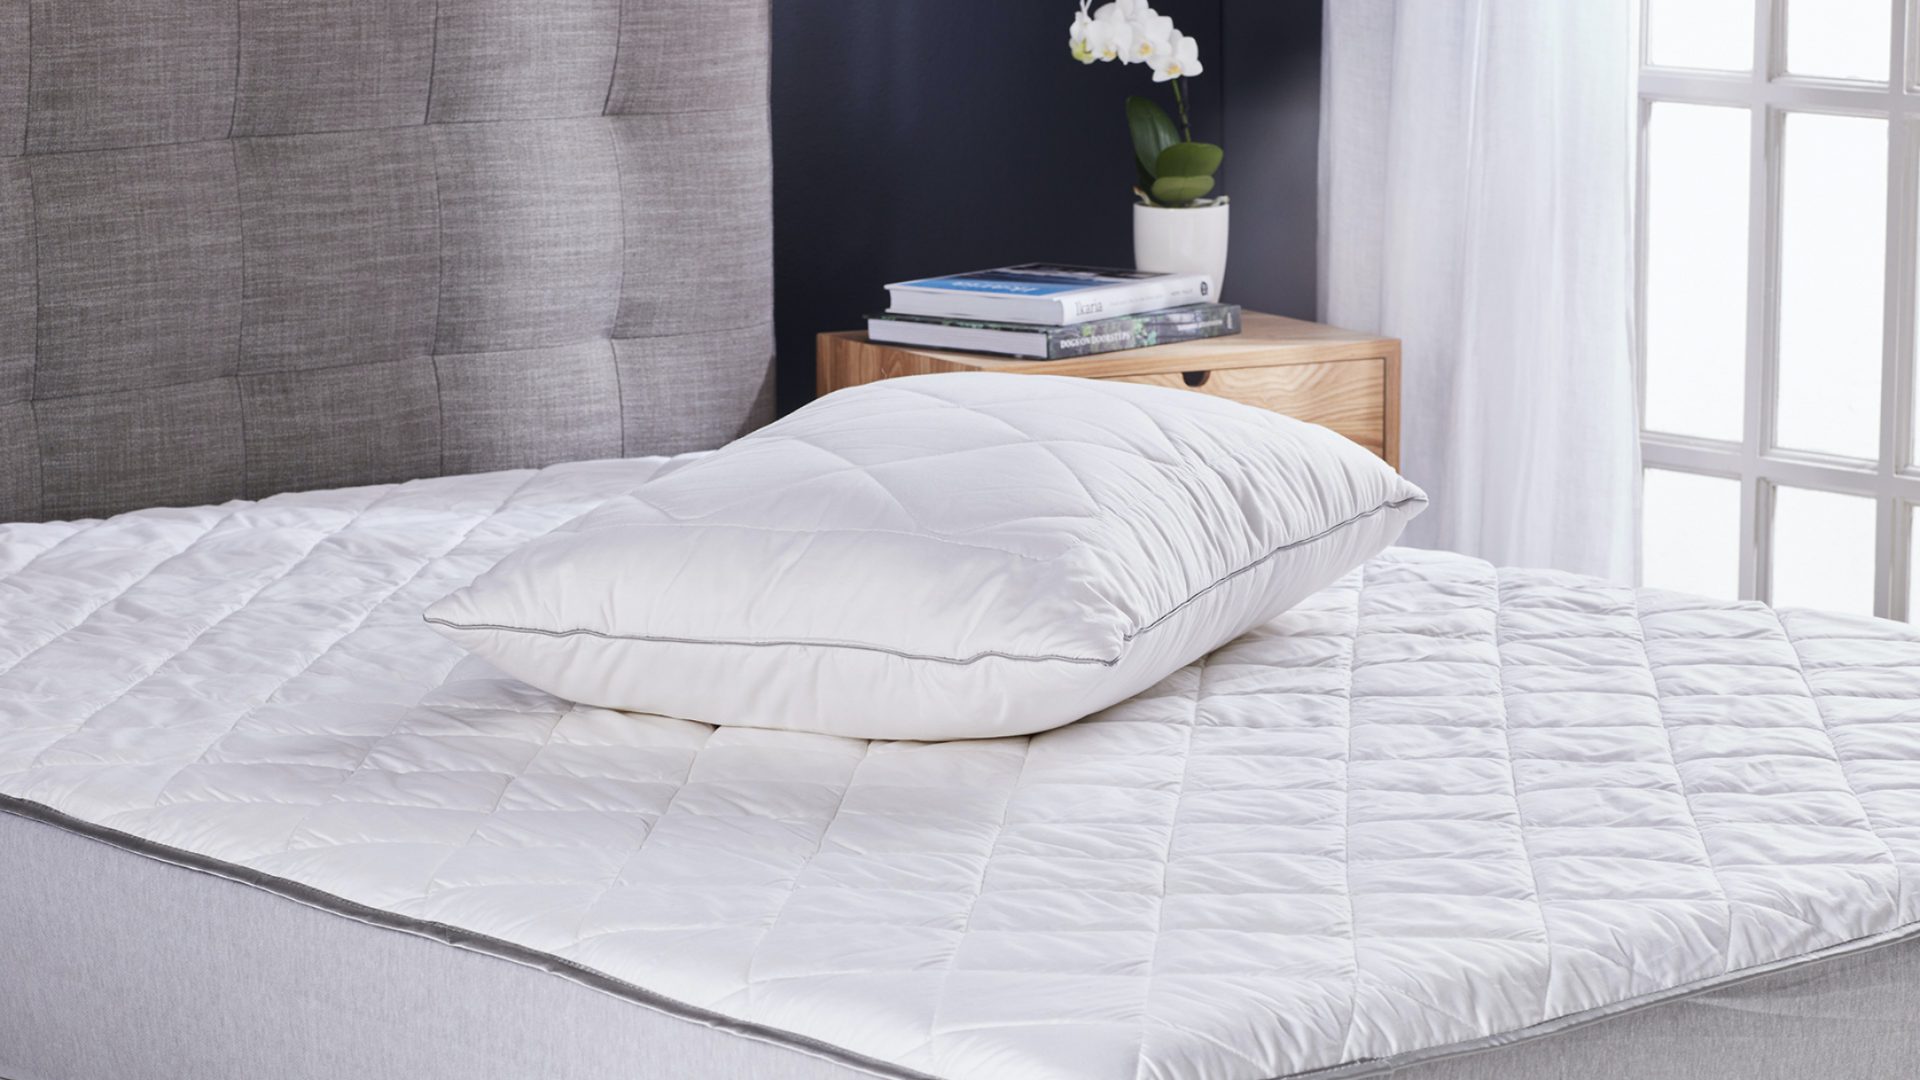 Your winter guide to the best bedding accessories